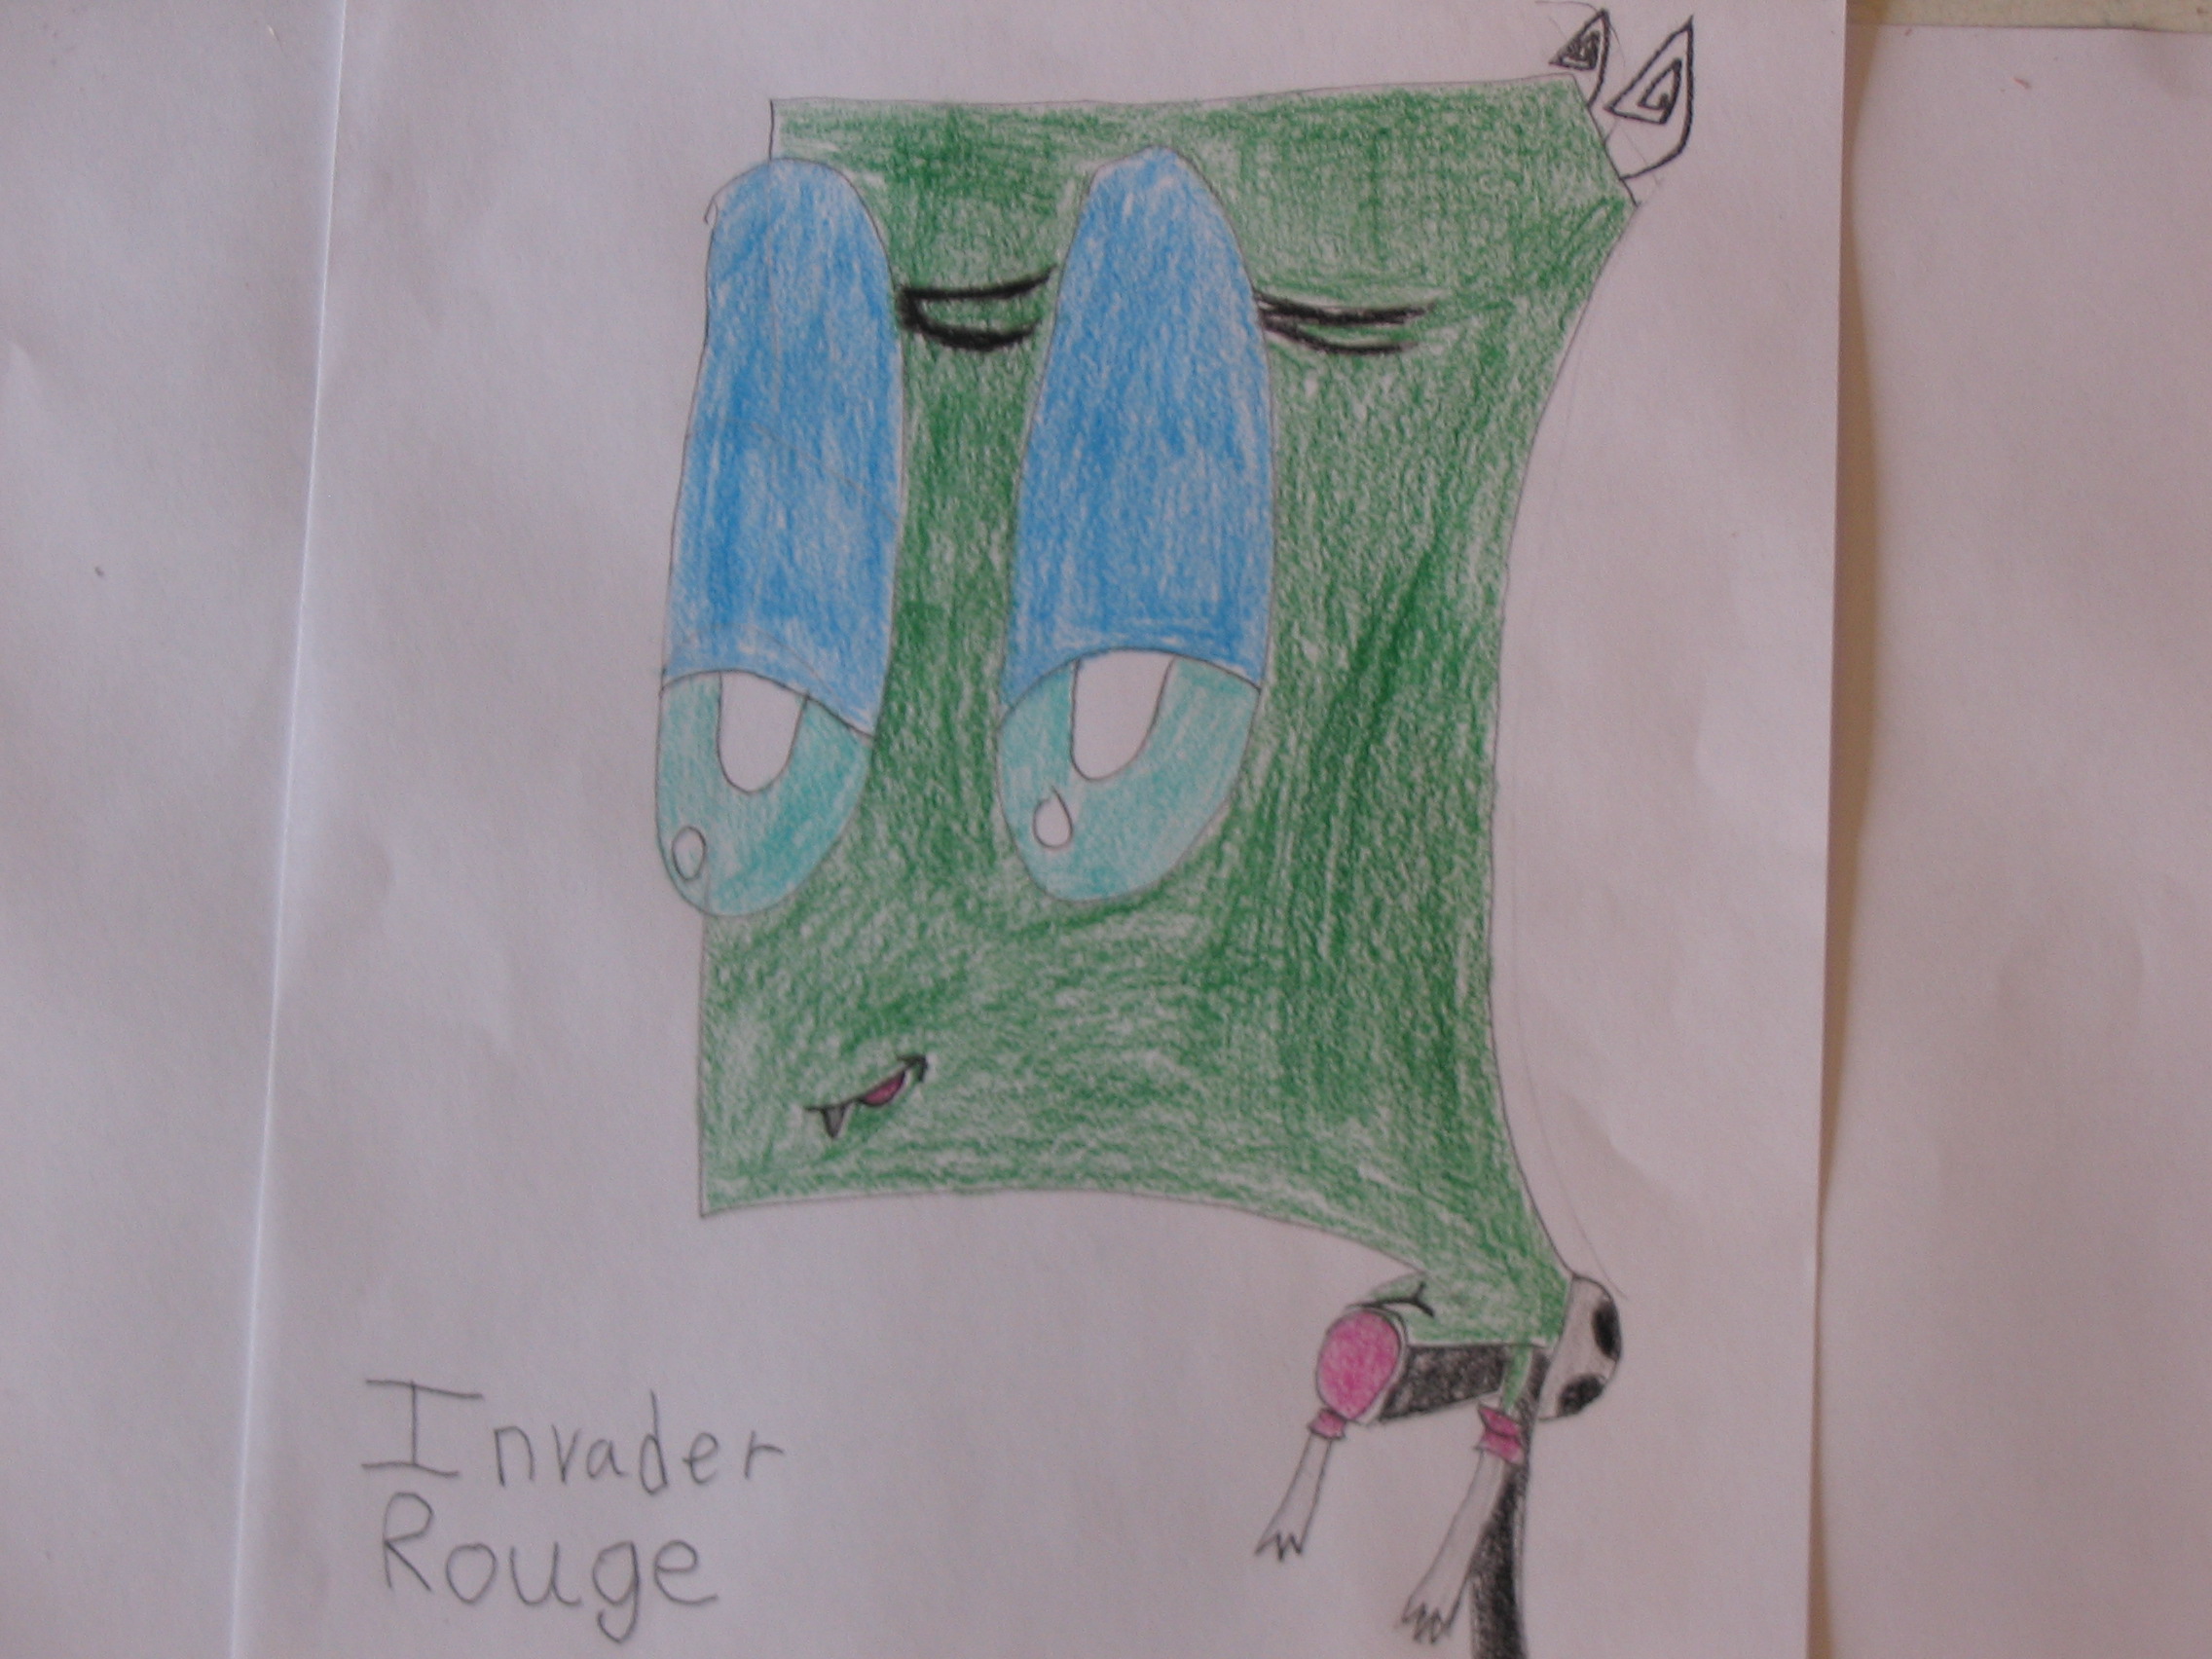 Invader Rouge by boobear9396